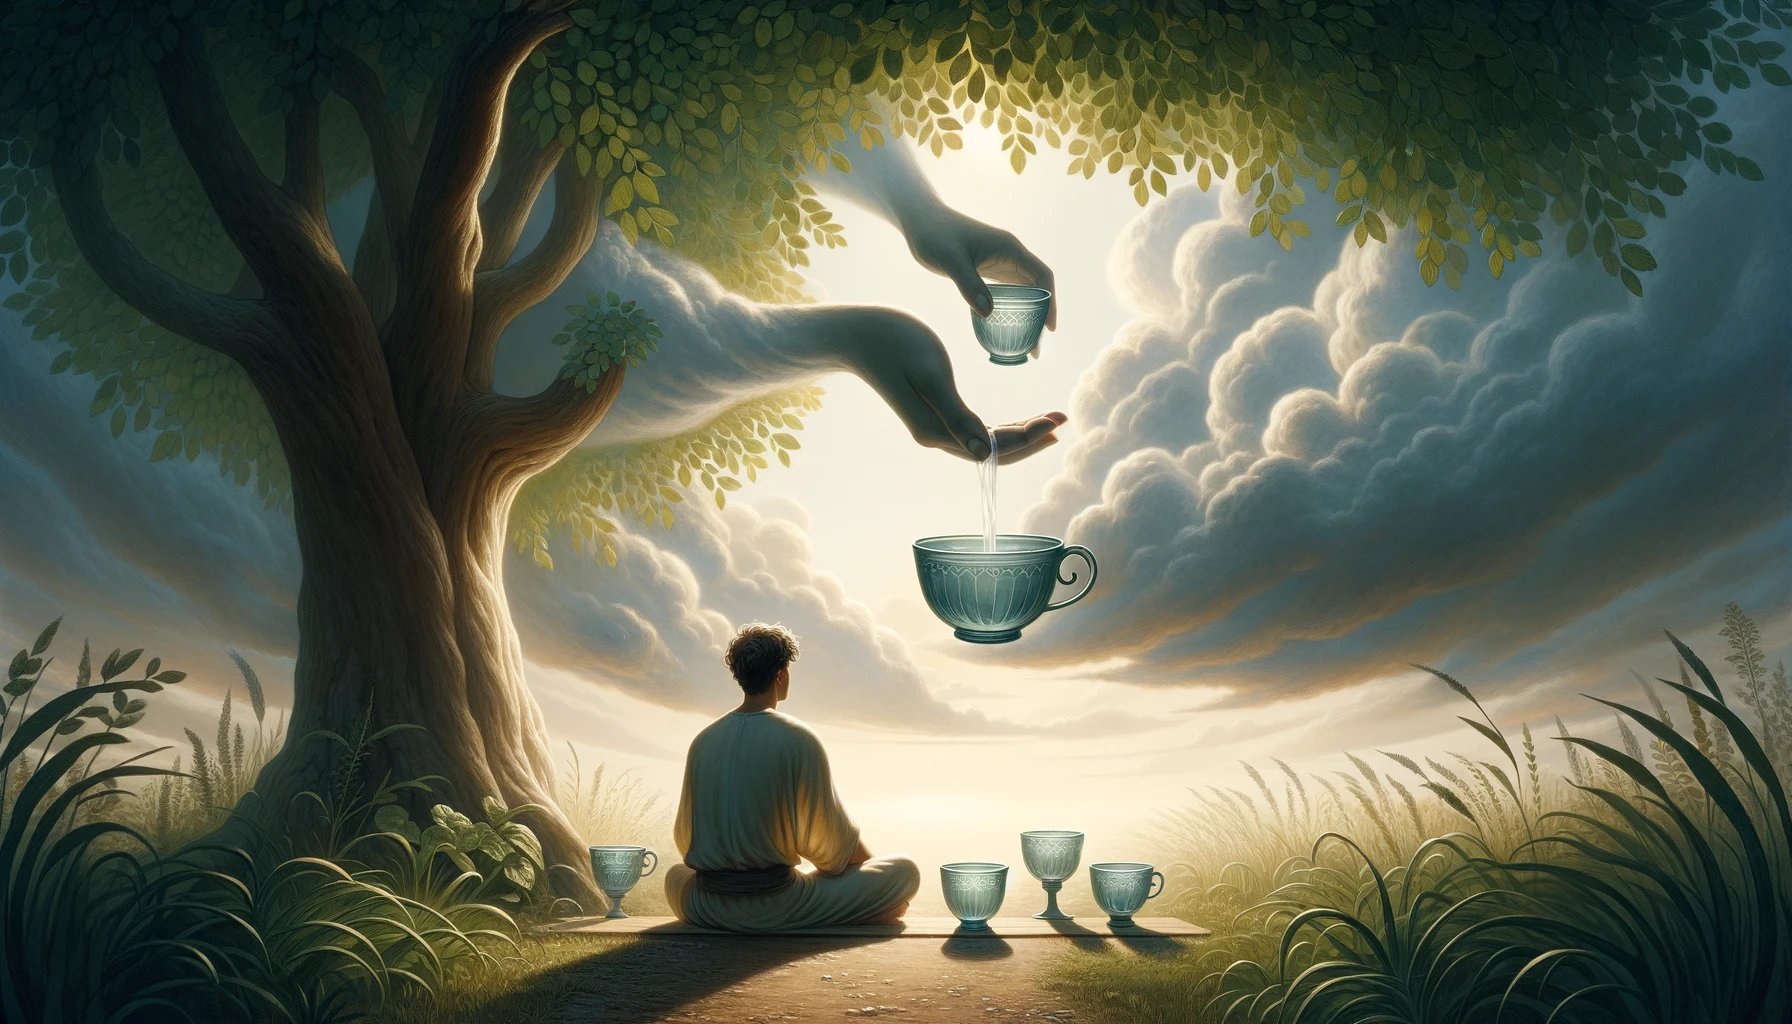 A contemplative individual sitting under a lush leafy tree. They are surrounded by three cups each brimming with water. Above them a mysterious han